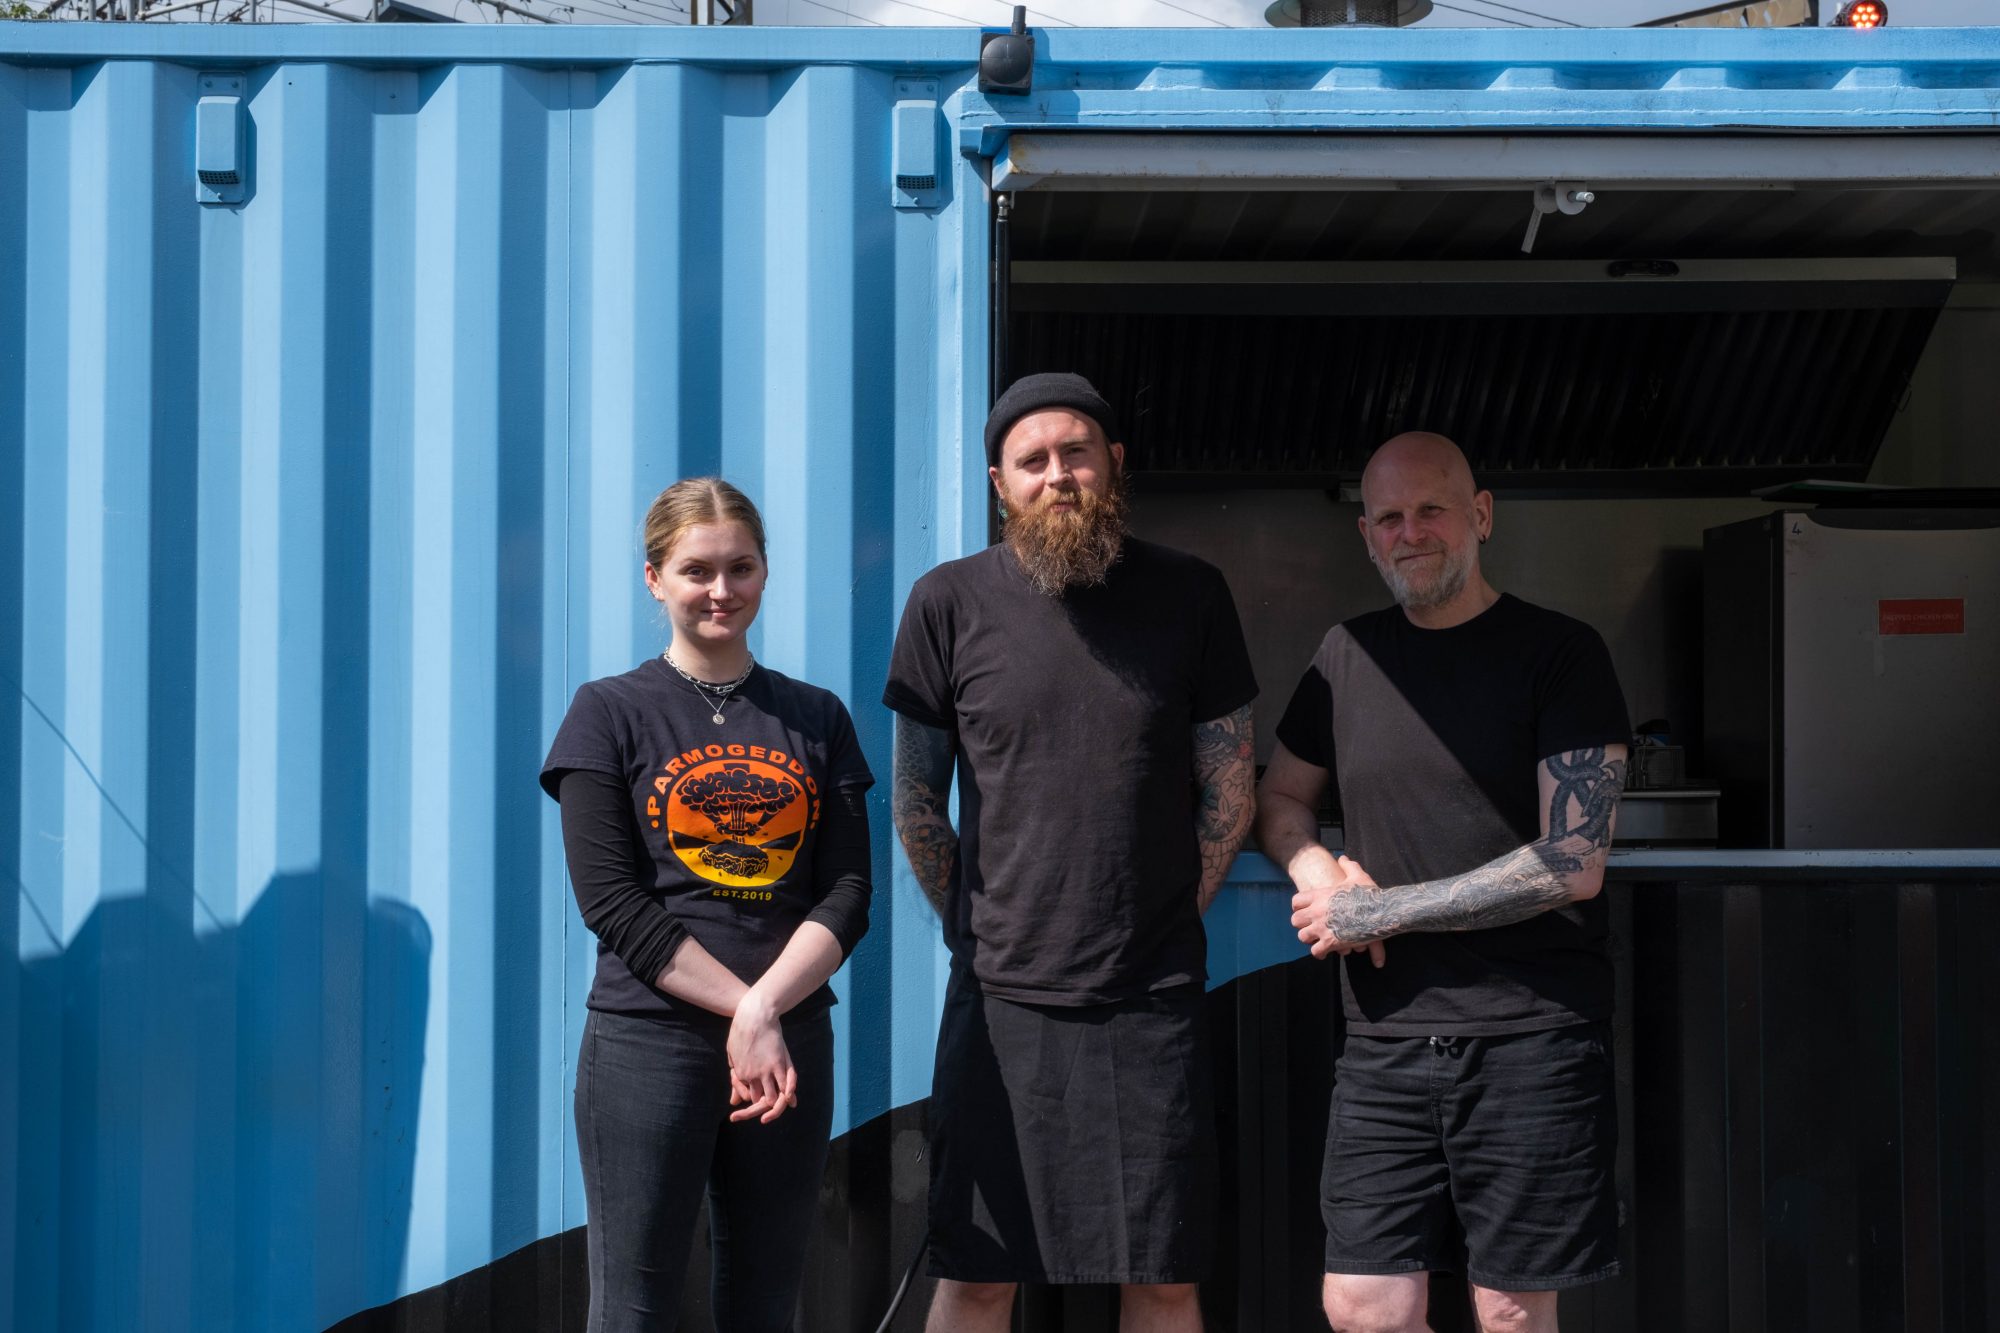 Image shows three people stood outside a storage container